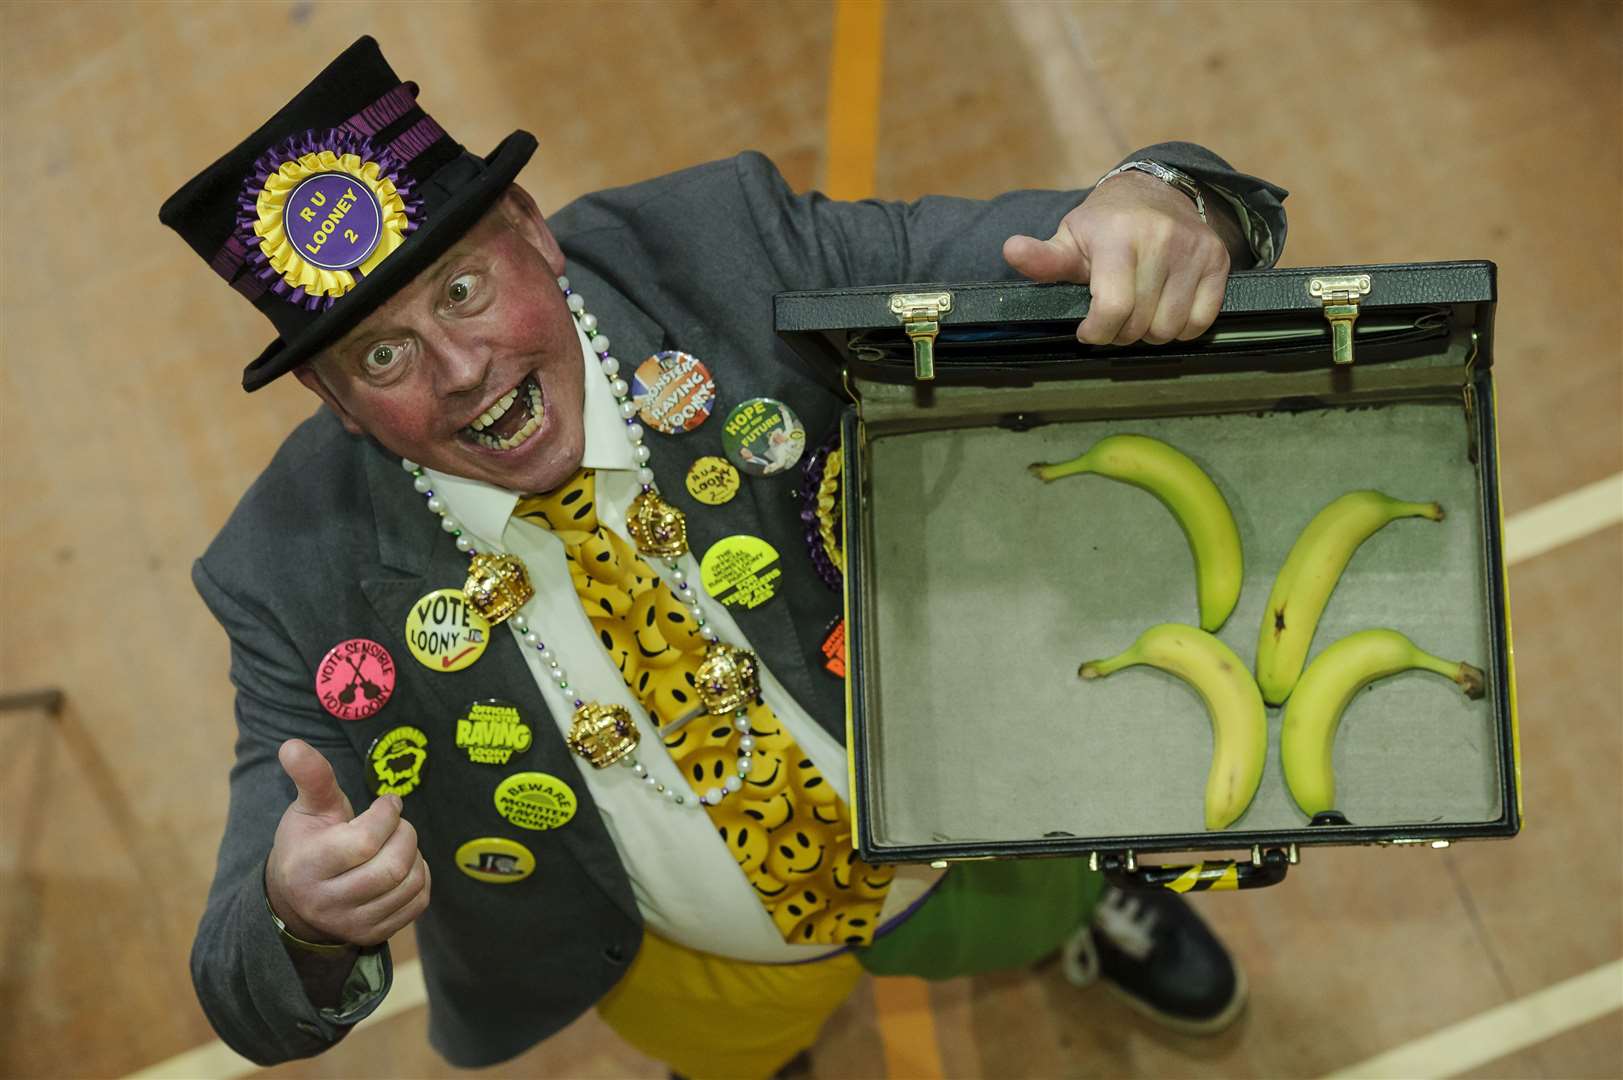 Get your bananas here: Sheppey's Mad Mike Young from the Official Monster Raving Loony Party takes in a supply for fellow candidates at the Sittingbourne and Sheppey count in 2017